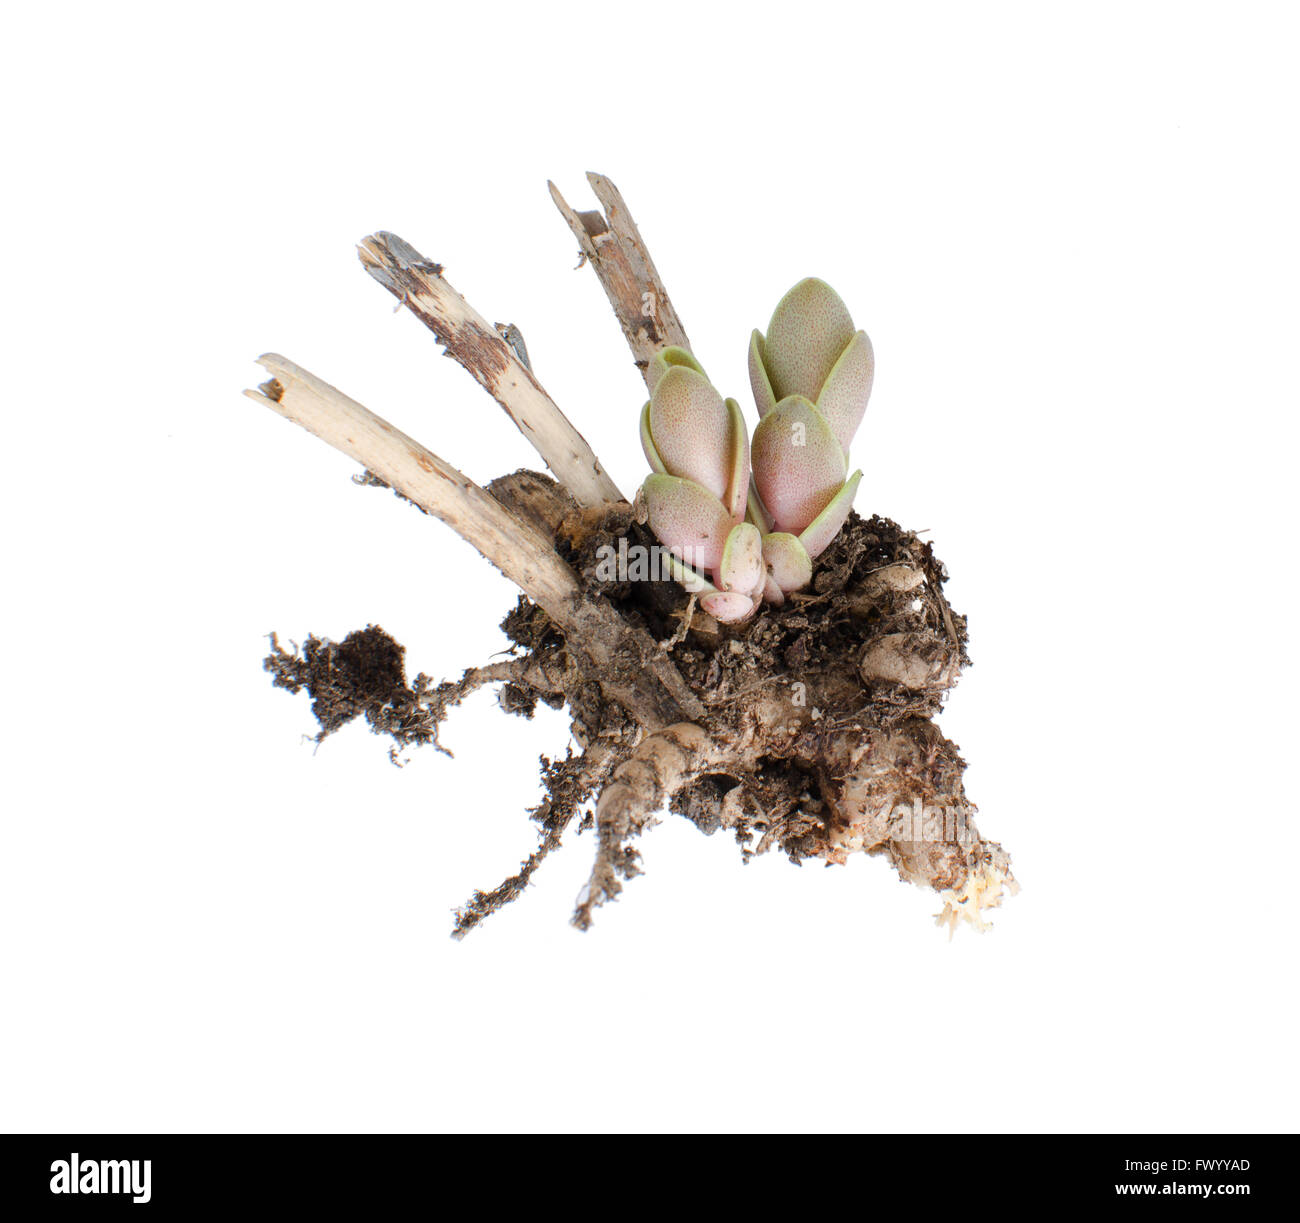 Sedum spectabile sprout, roots and old twig isolated on white background. Stock Photo